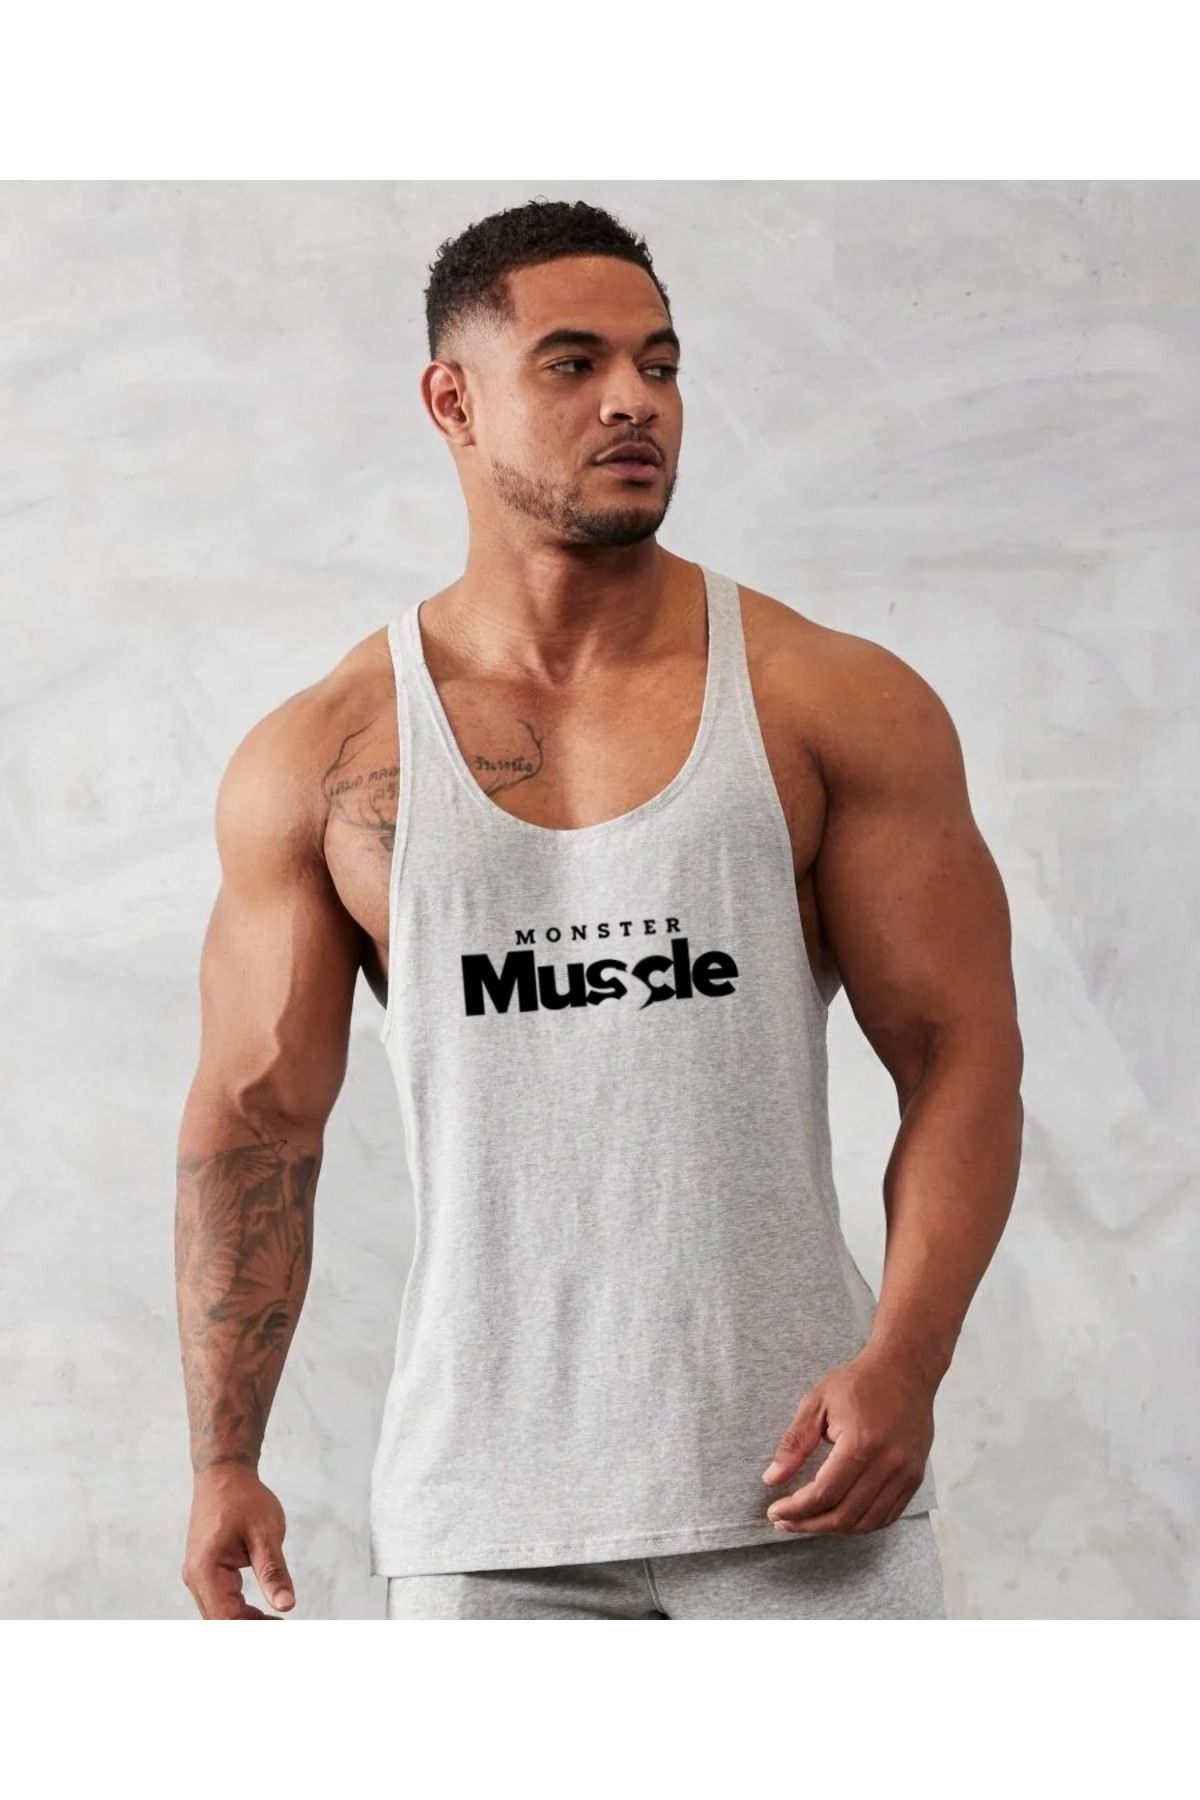 Ghedto Monster Muscle Gym Fitness Tank Top Sporcu Atleti [Gri]